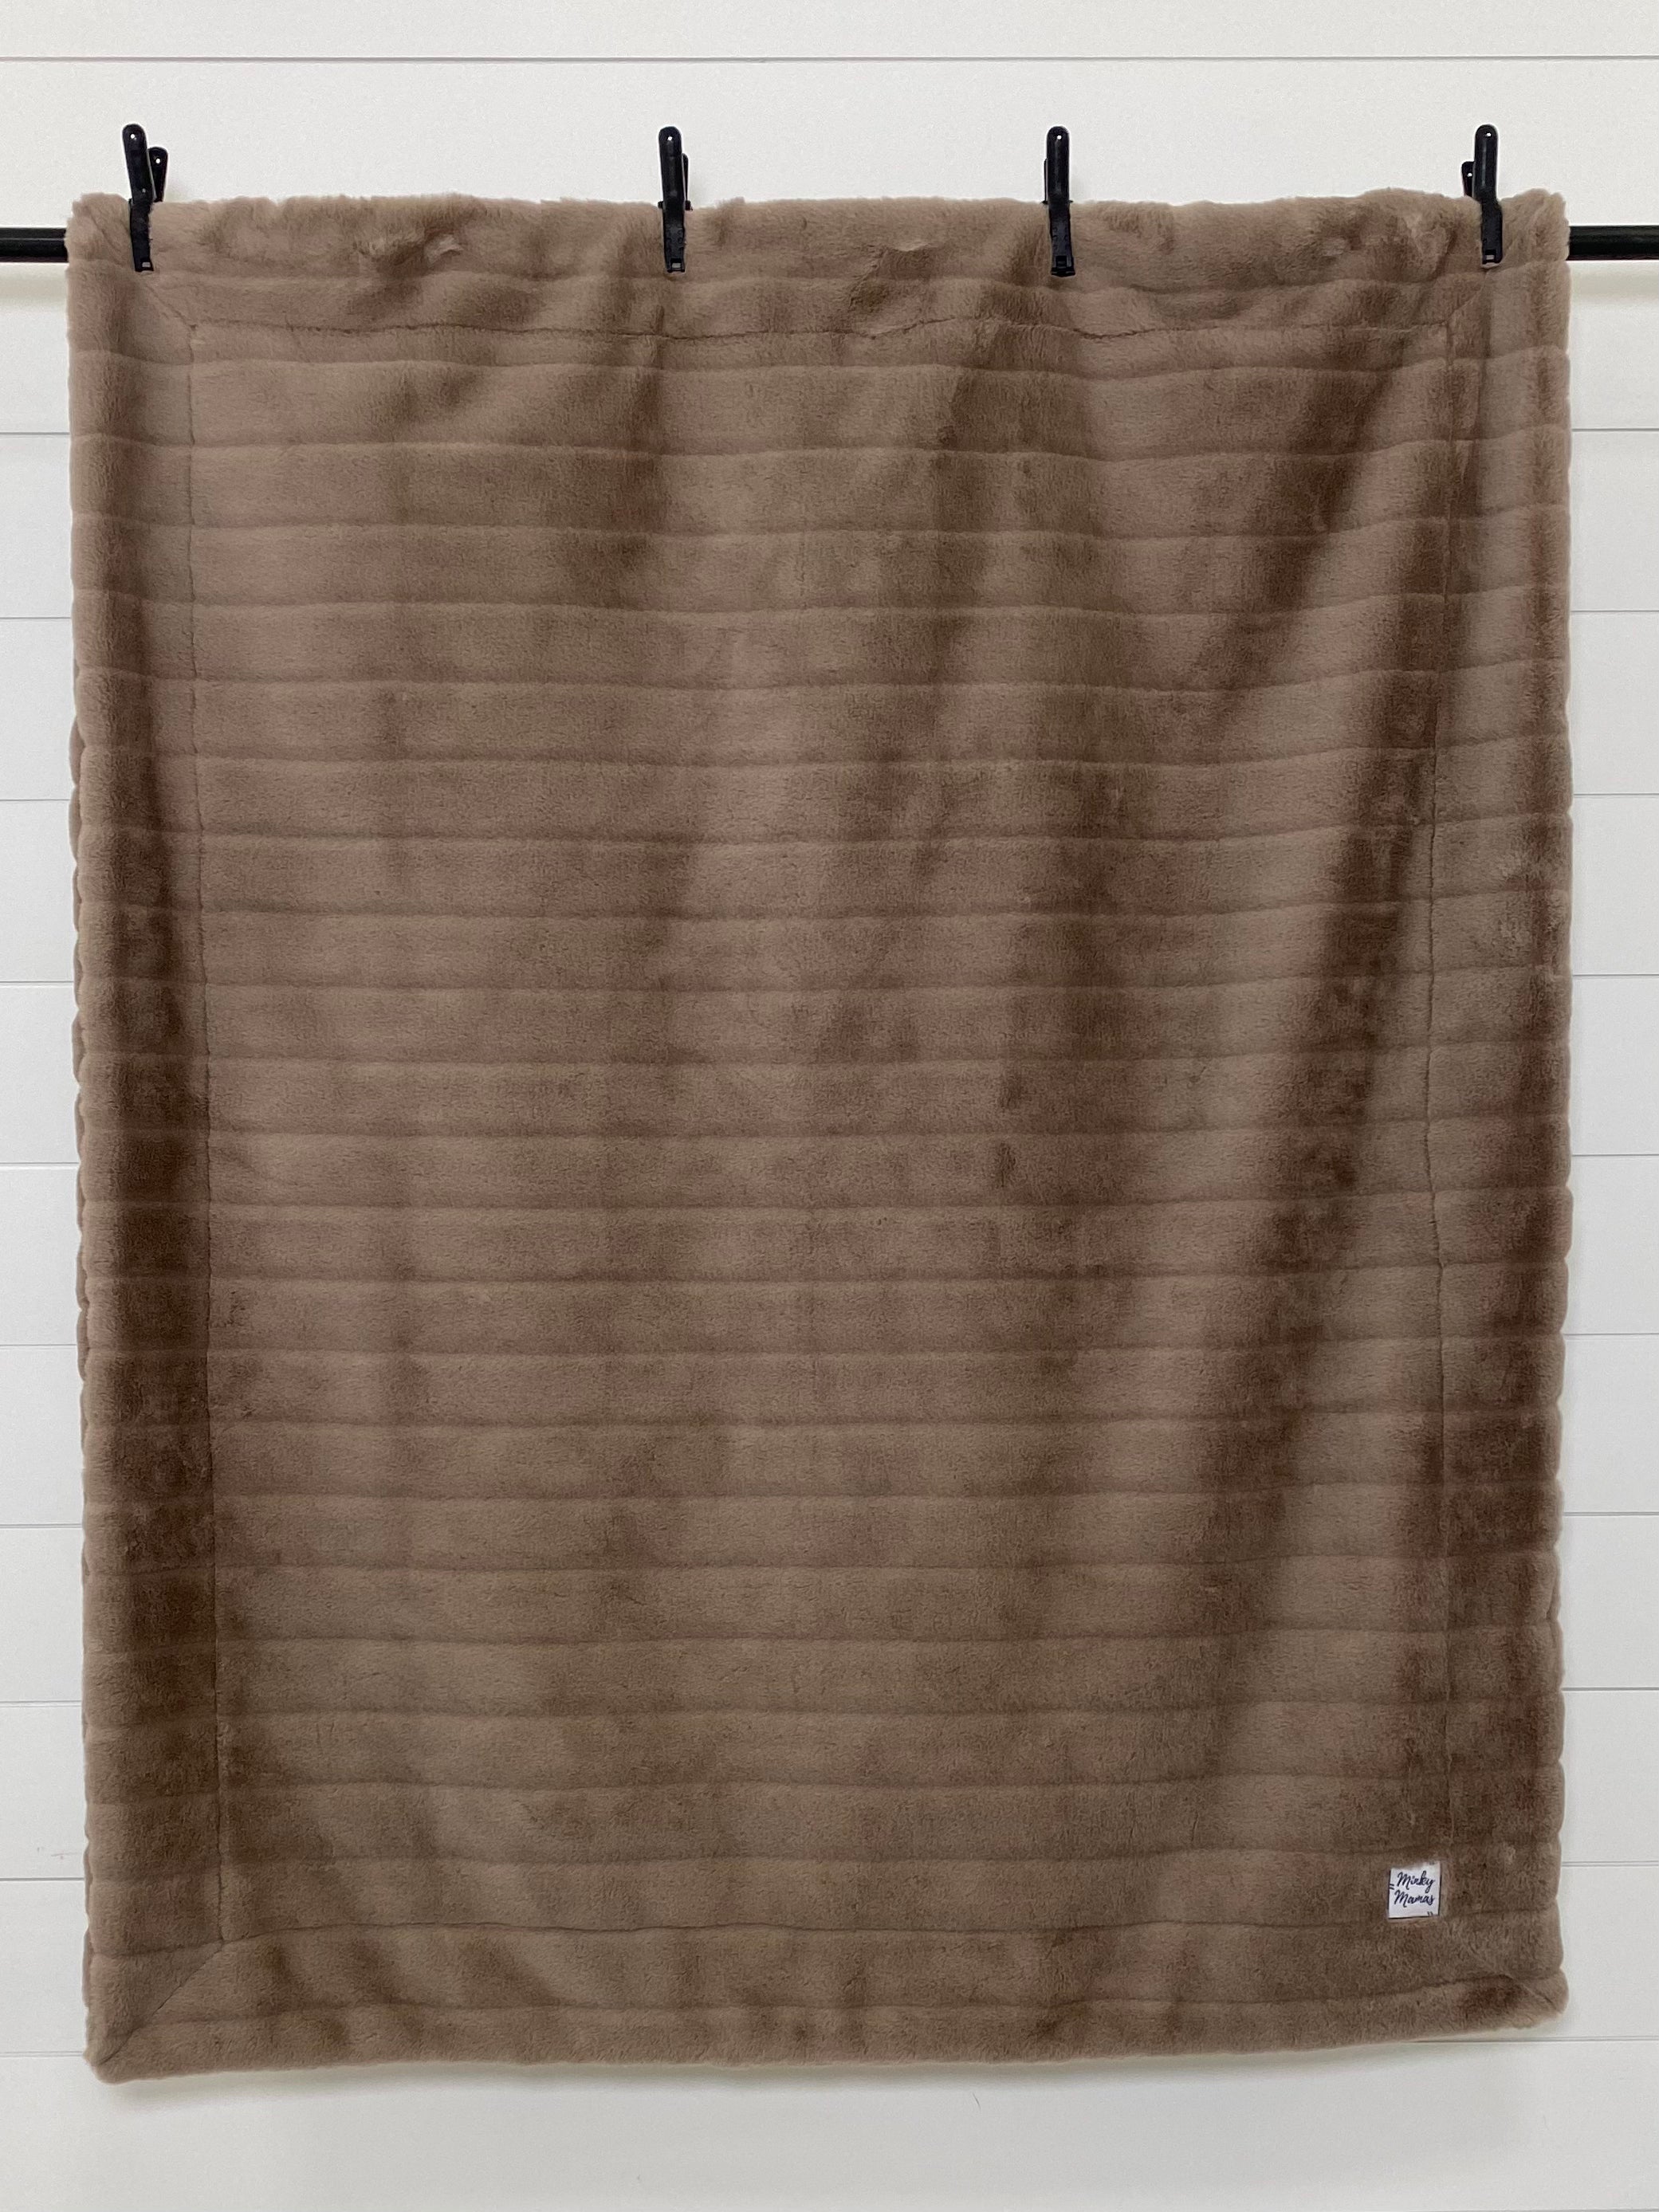 The Simply Taupe Throw